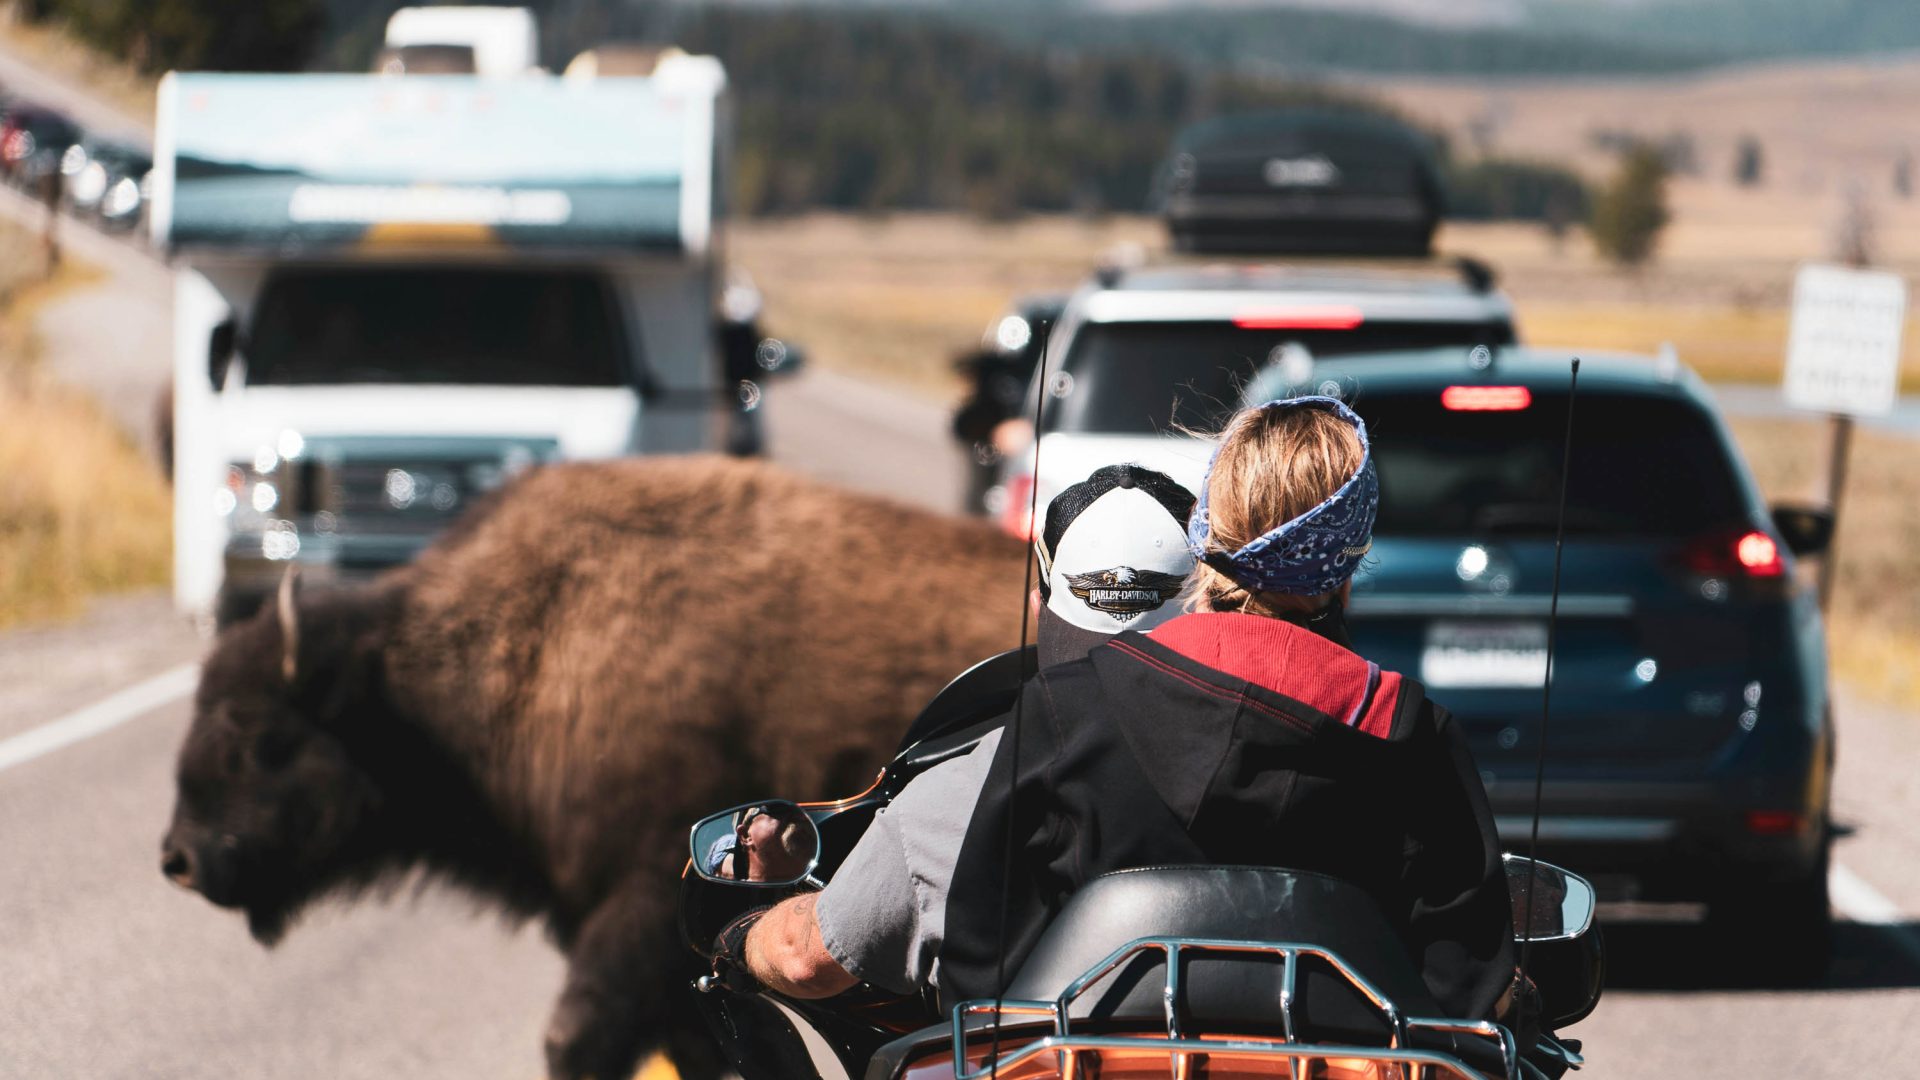 A bison crosses a road, stopping traffic.